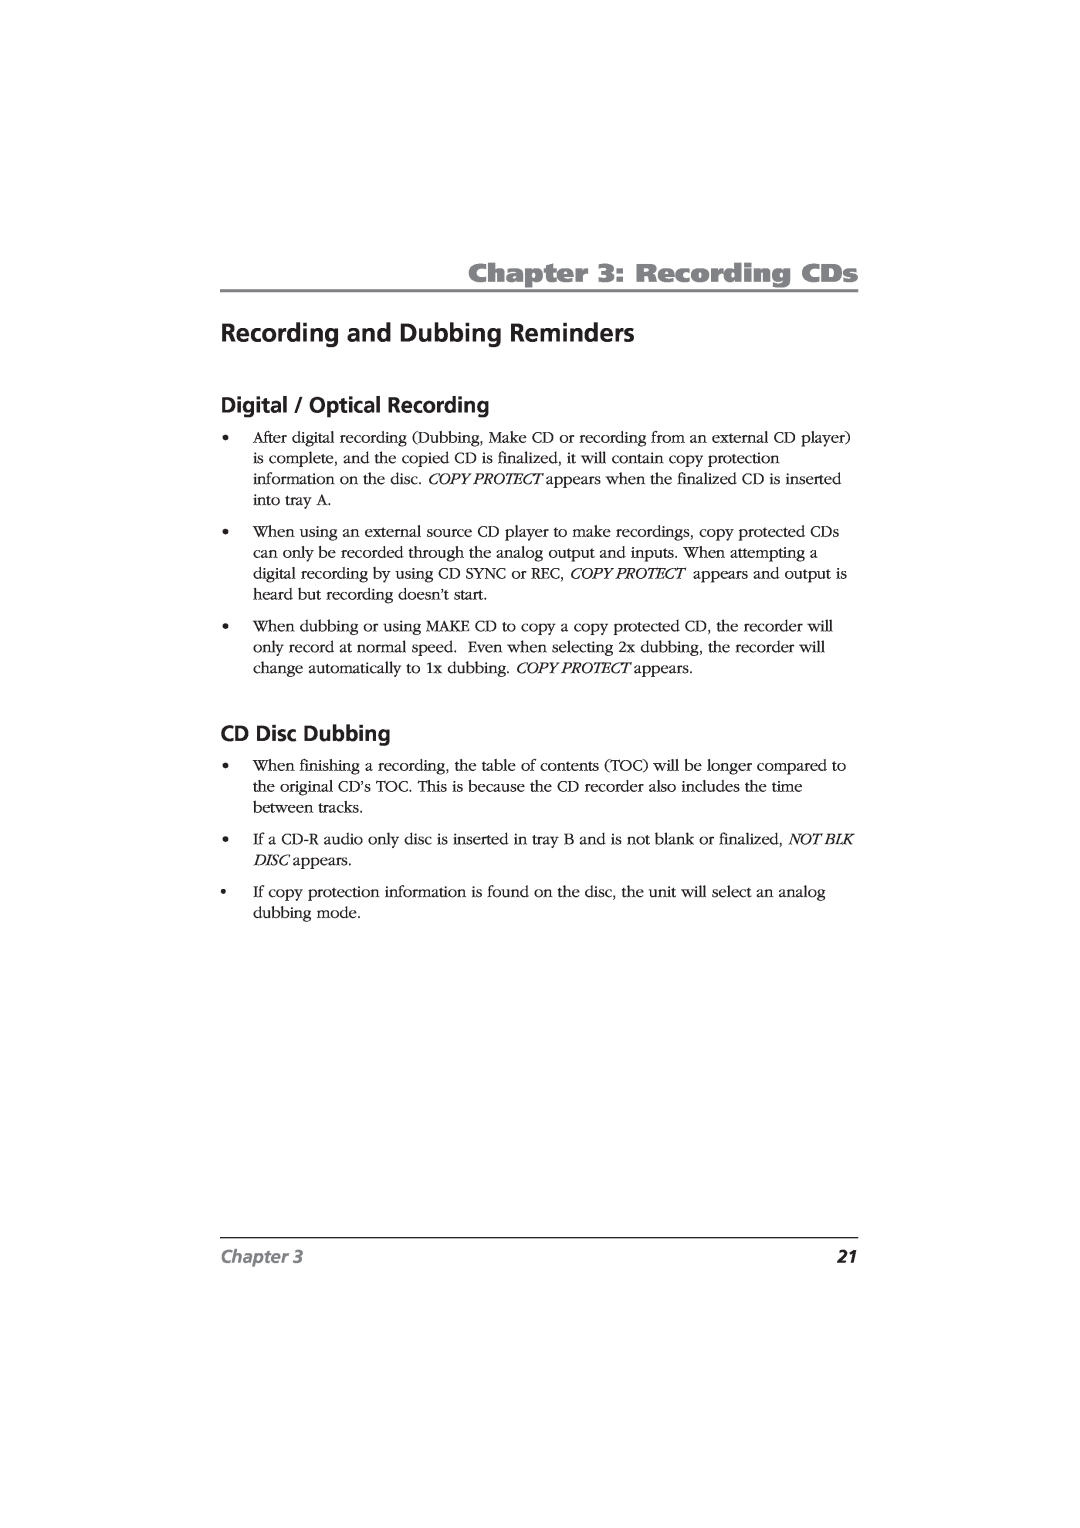 RCA CDRW10 manual Recording and Dubbing Reminders, Recording CDs, Digital / Optical Recording, CD Disc Dubbing, Chapter 